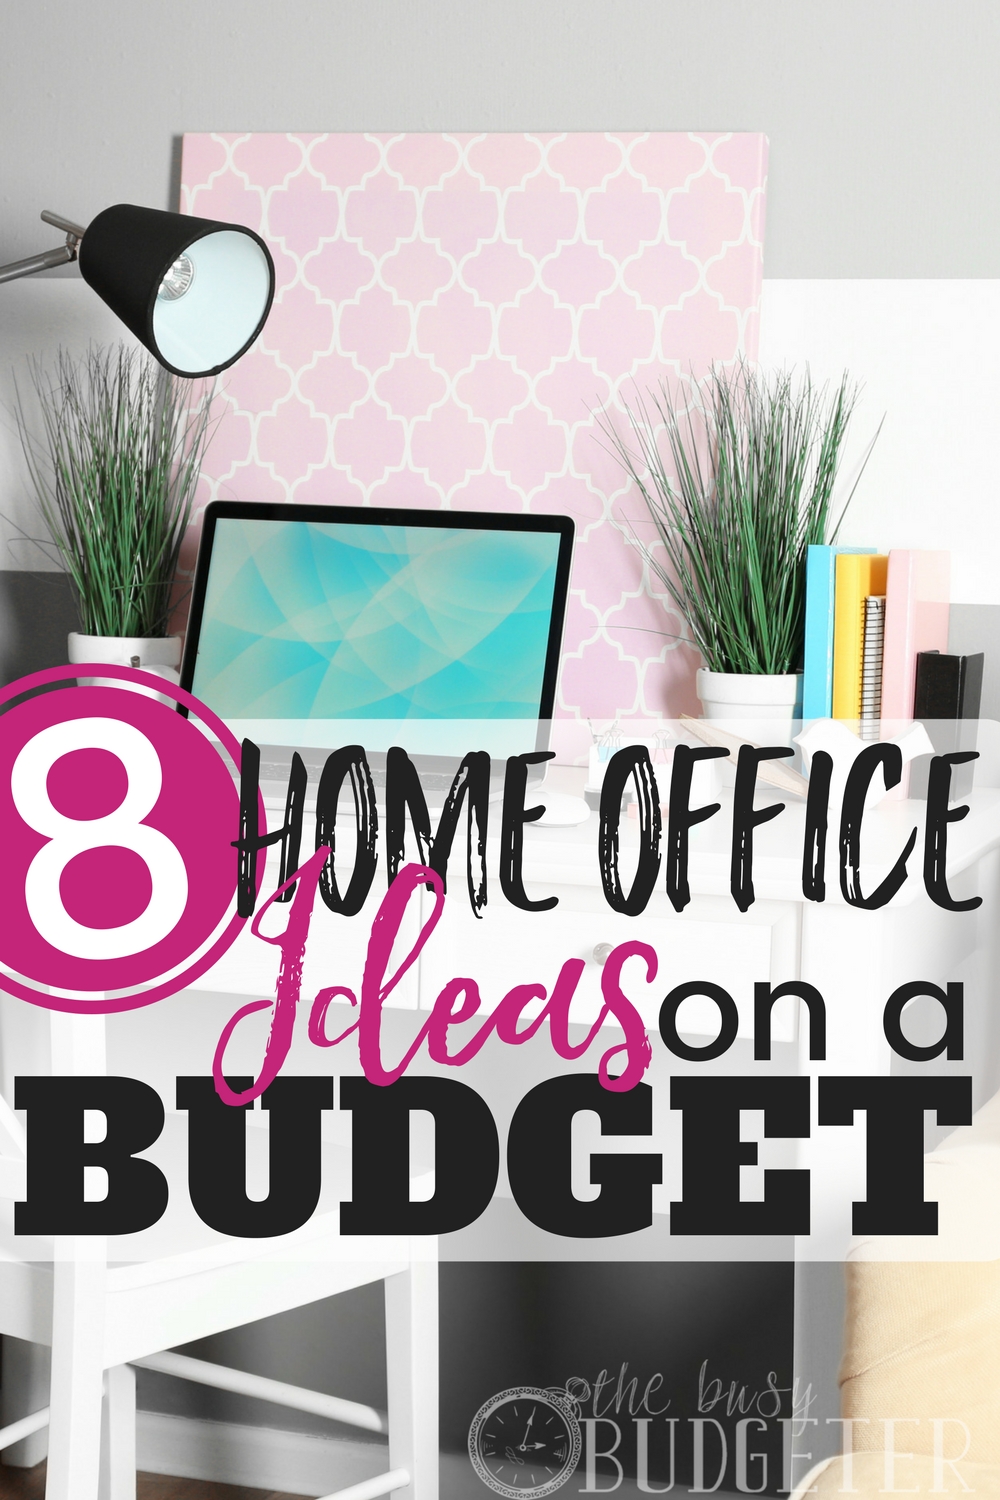 These home office ideas on a budget are so great! I always wanted a  Pinterest